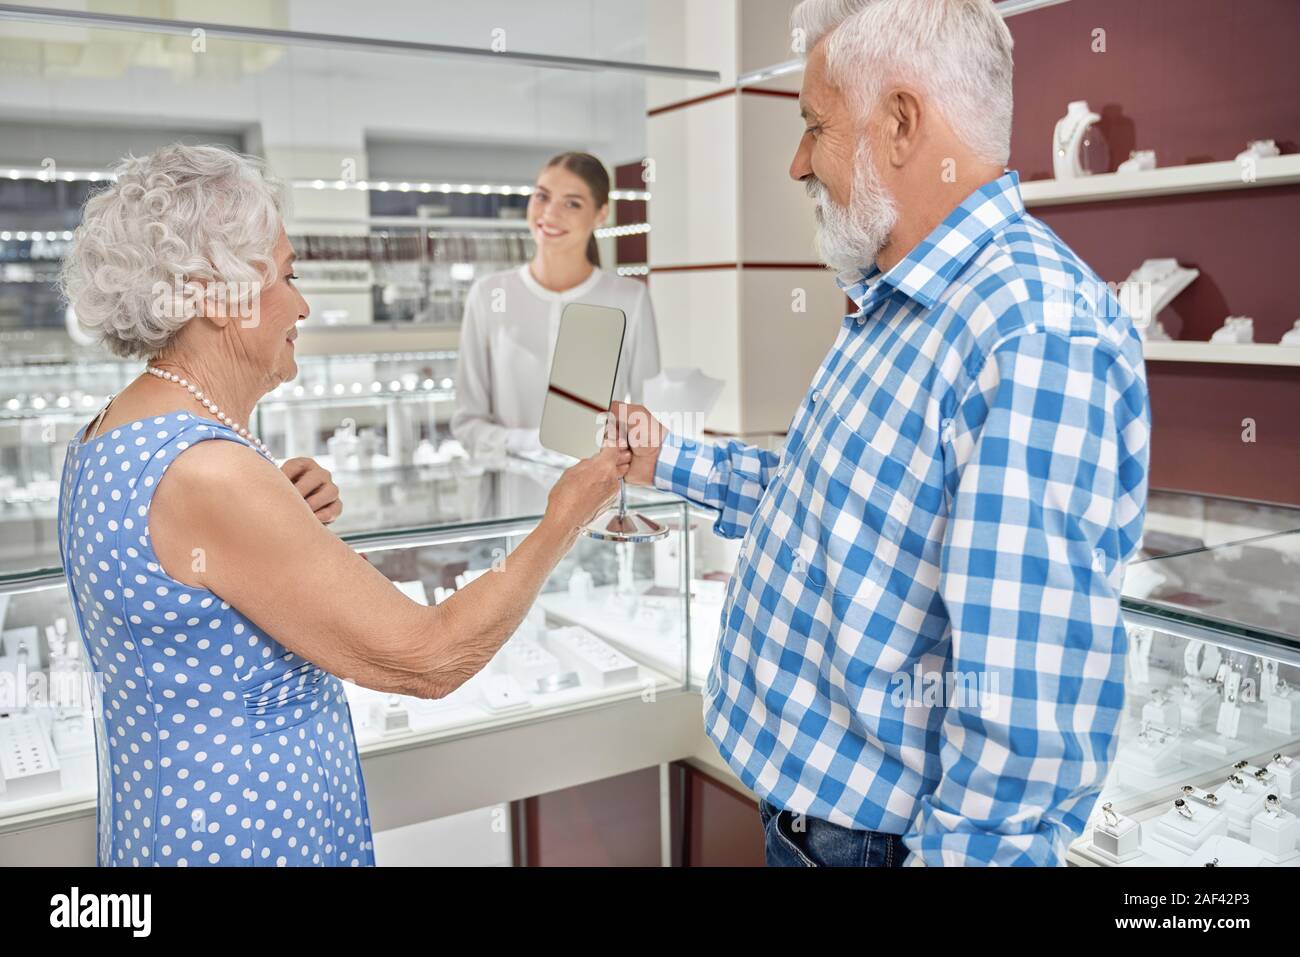 Senior lady with grey hair wearing blue polka dot dress, trying on pearl necklace and looking at mirror that holding her husband in checkered shirt. Happy mature couple buying jewelry in luxury store Stock Photo